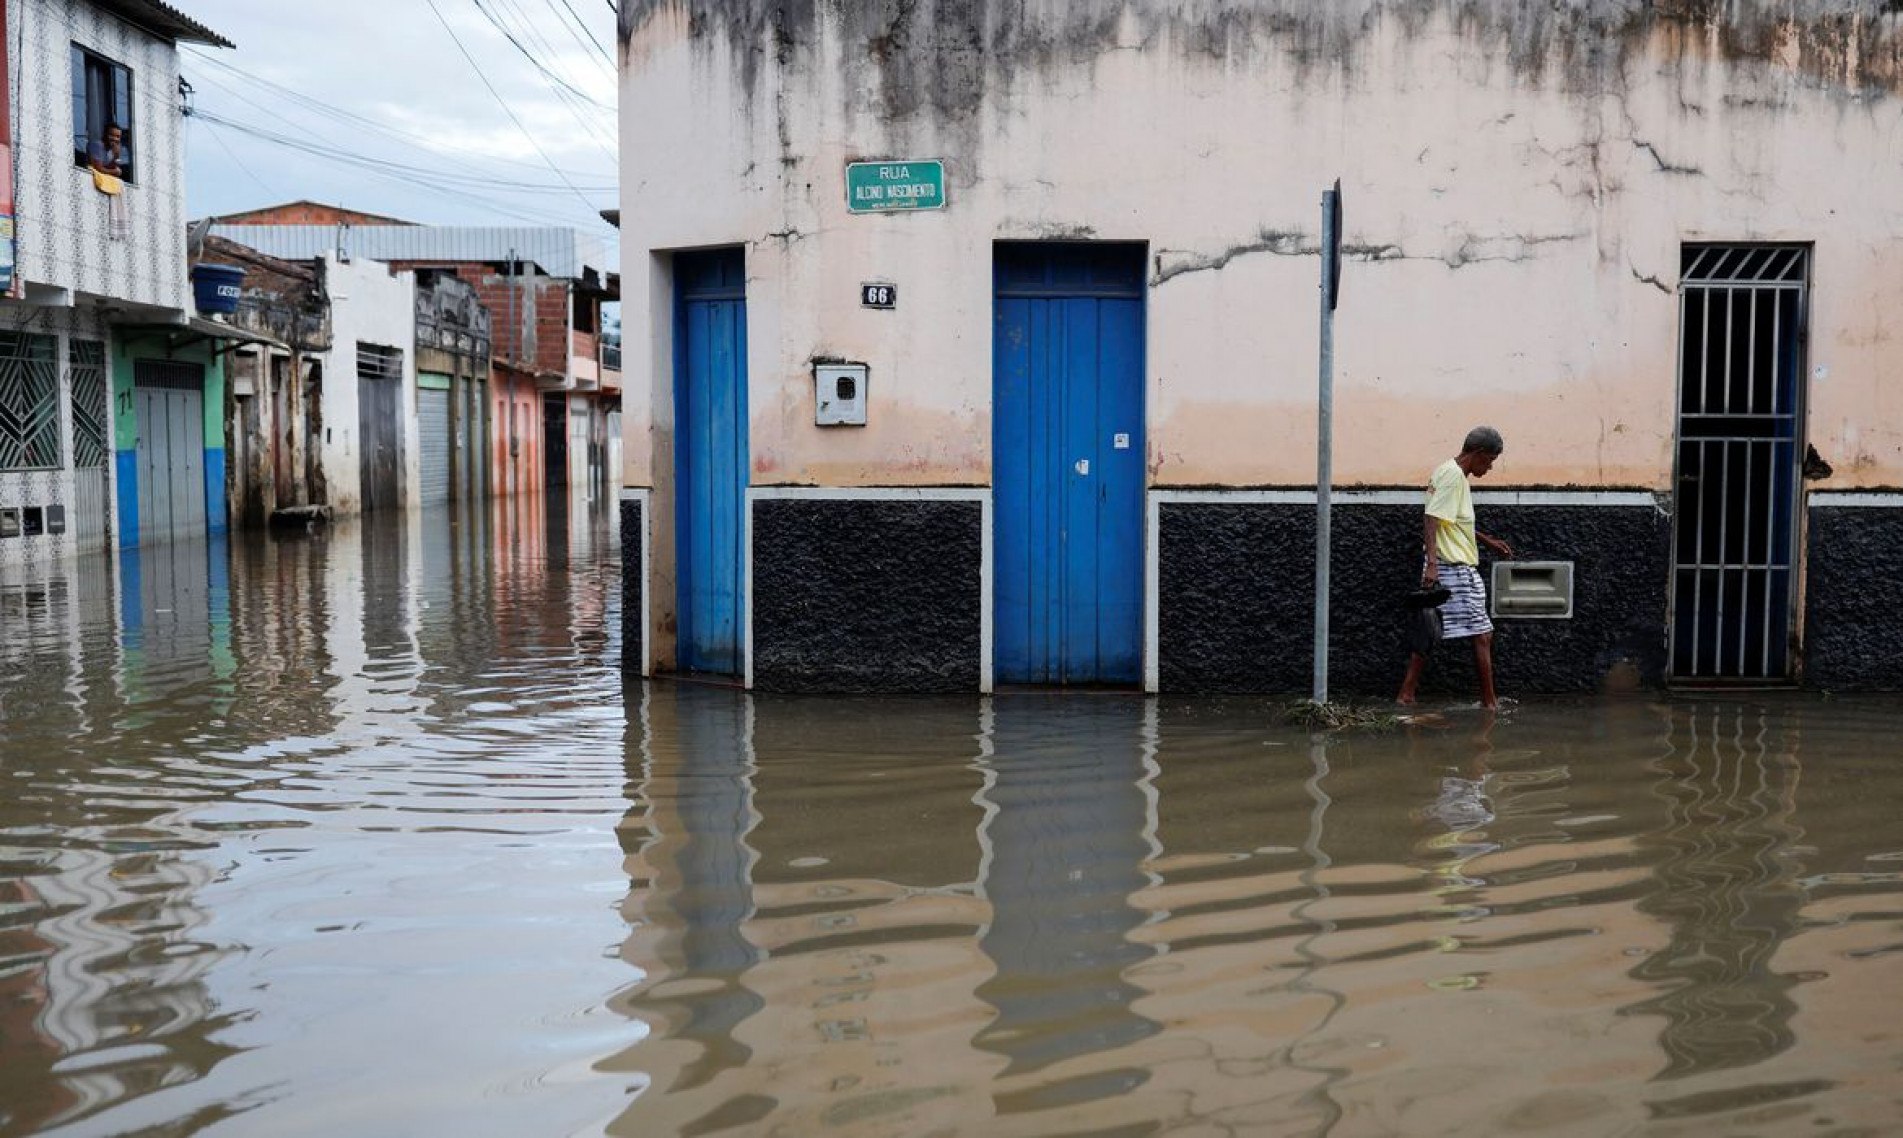  A person walks through the water along a street during floods caused by heavy rain in Itajuipe, Bahia state, Brazil December 27, 2021. REUTERS/Amanda Perobelli
    